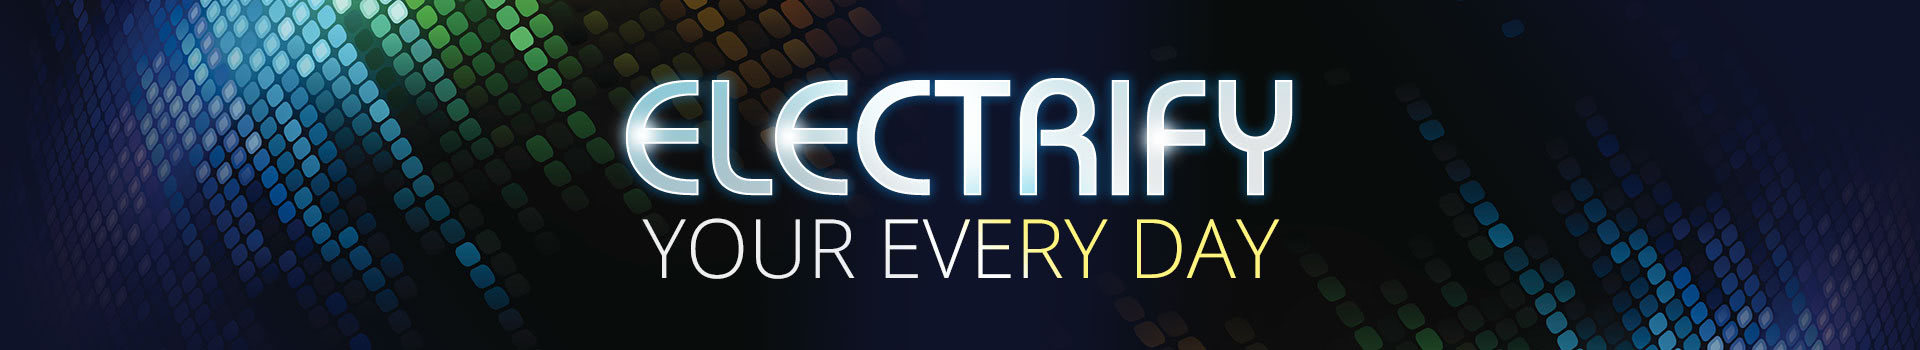 ELECTRIFY YOUR EVERY DAY